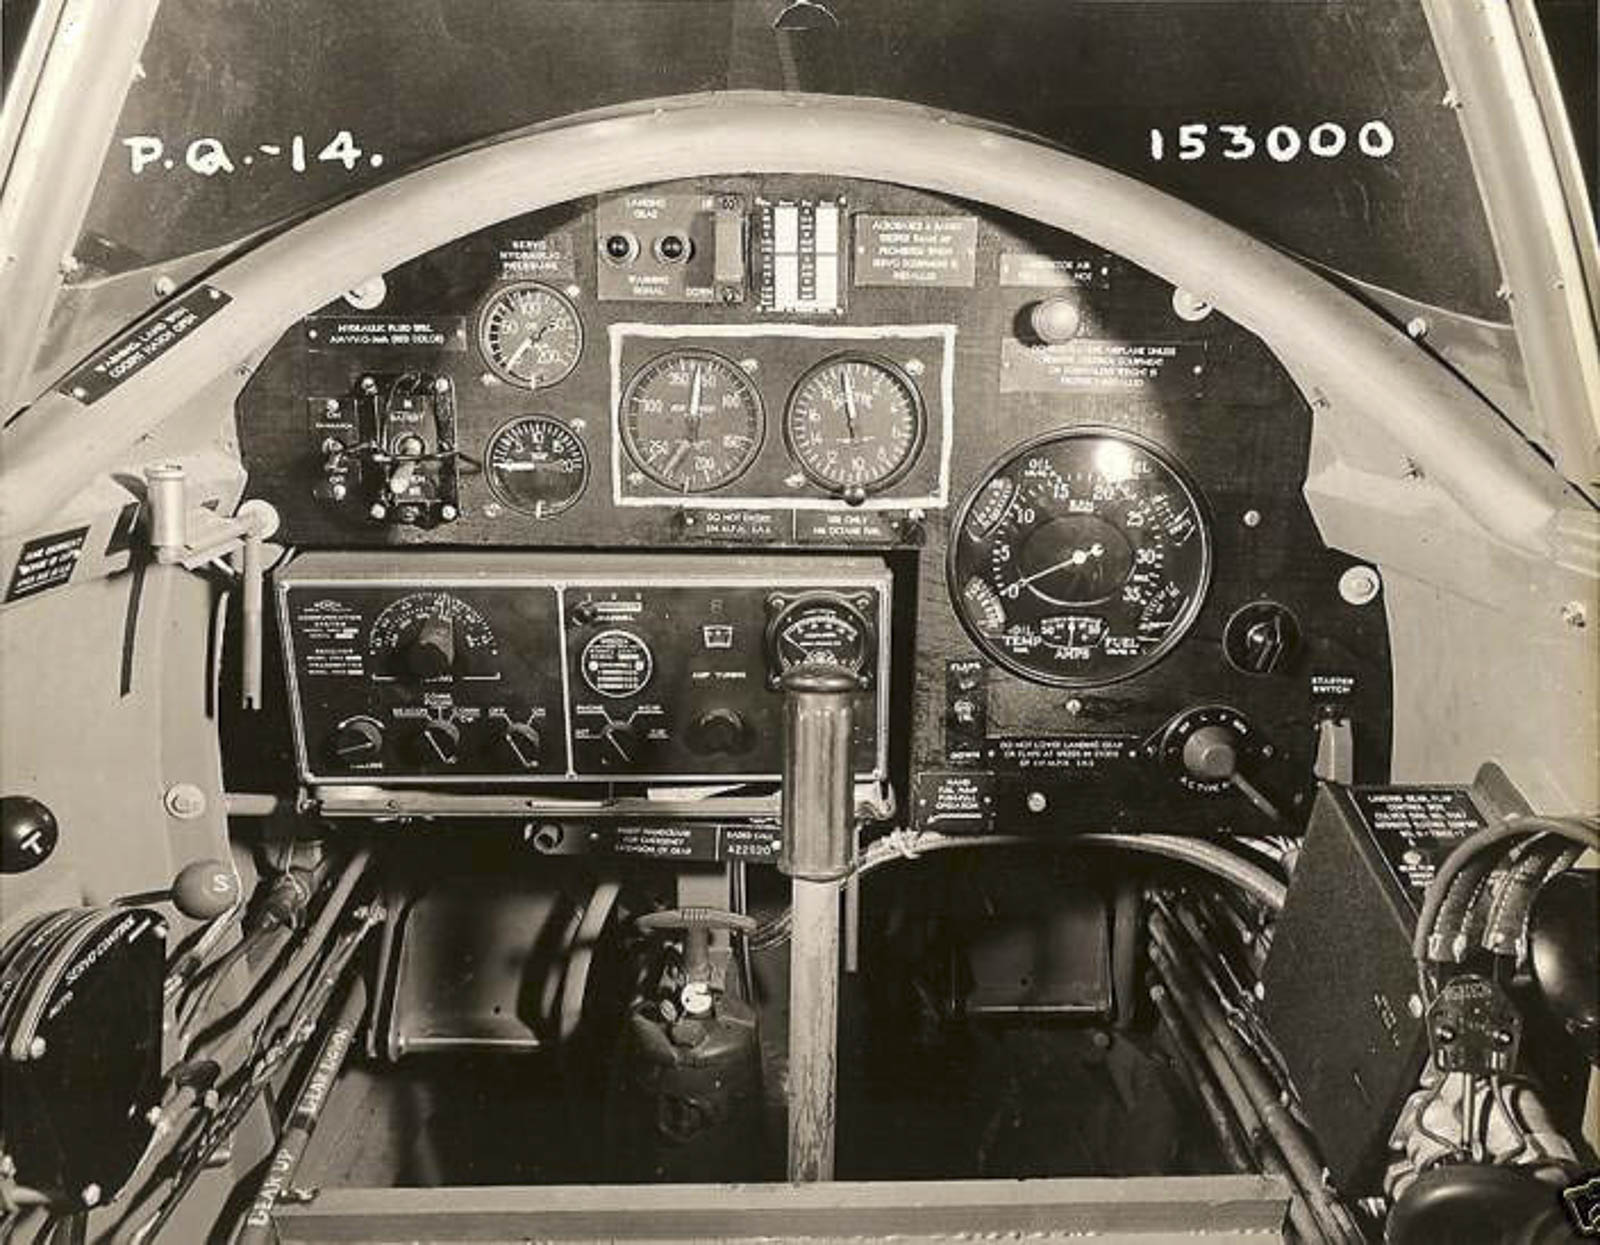 A Wartime Image Of A Culver Pq 14 Cadet's Cockpit. (image Source Unknown)